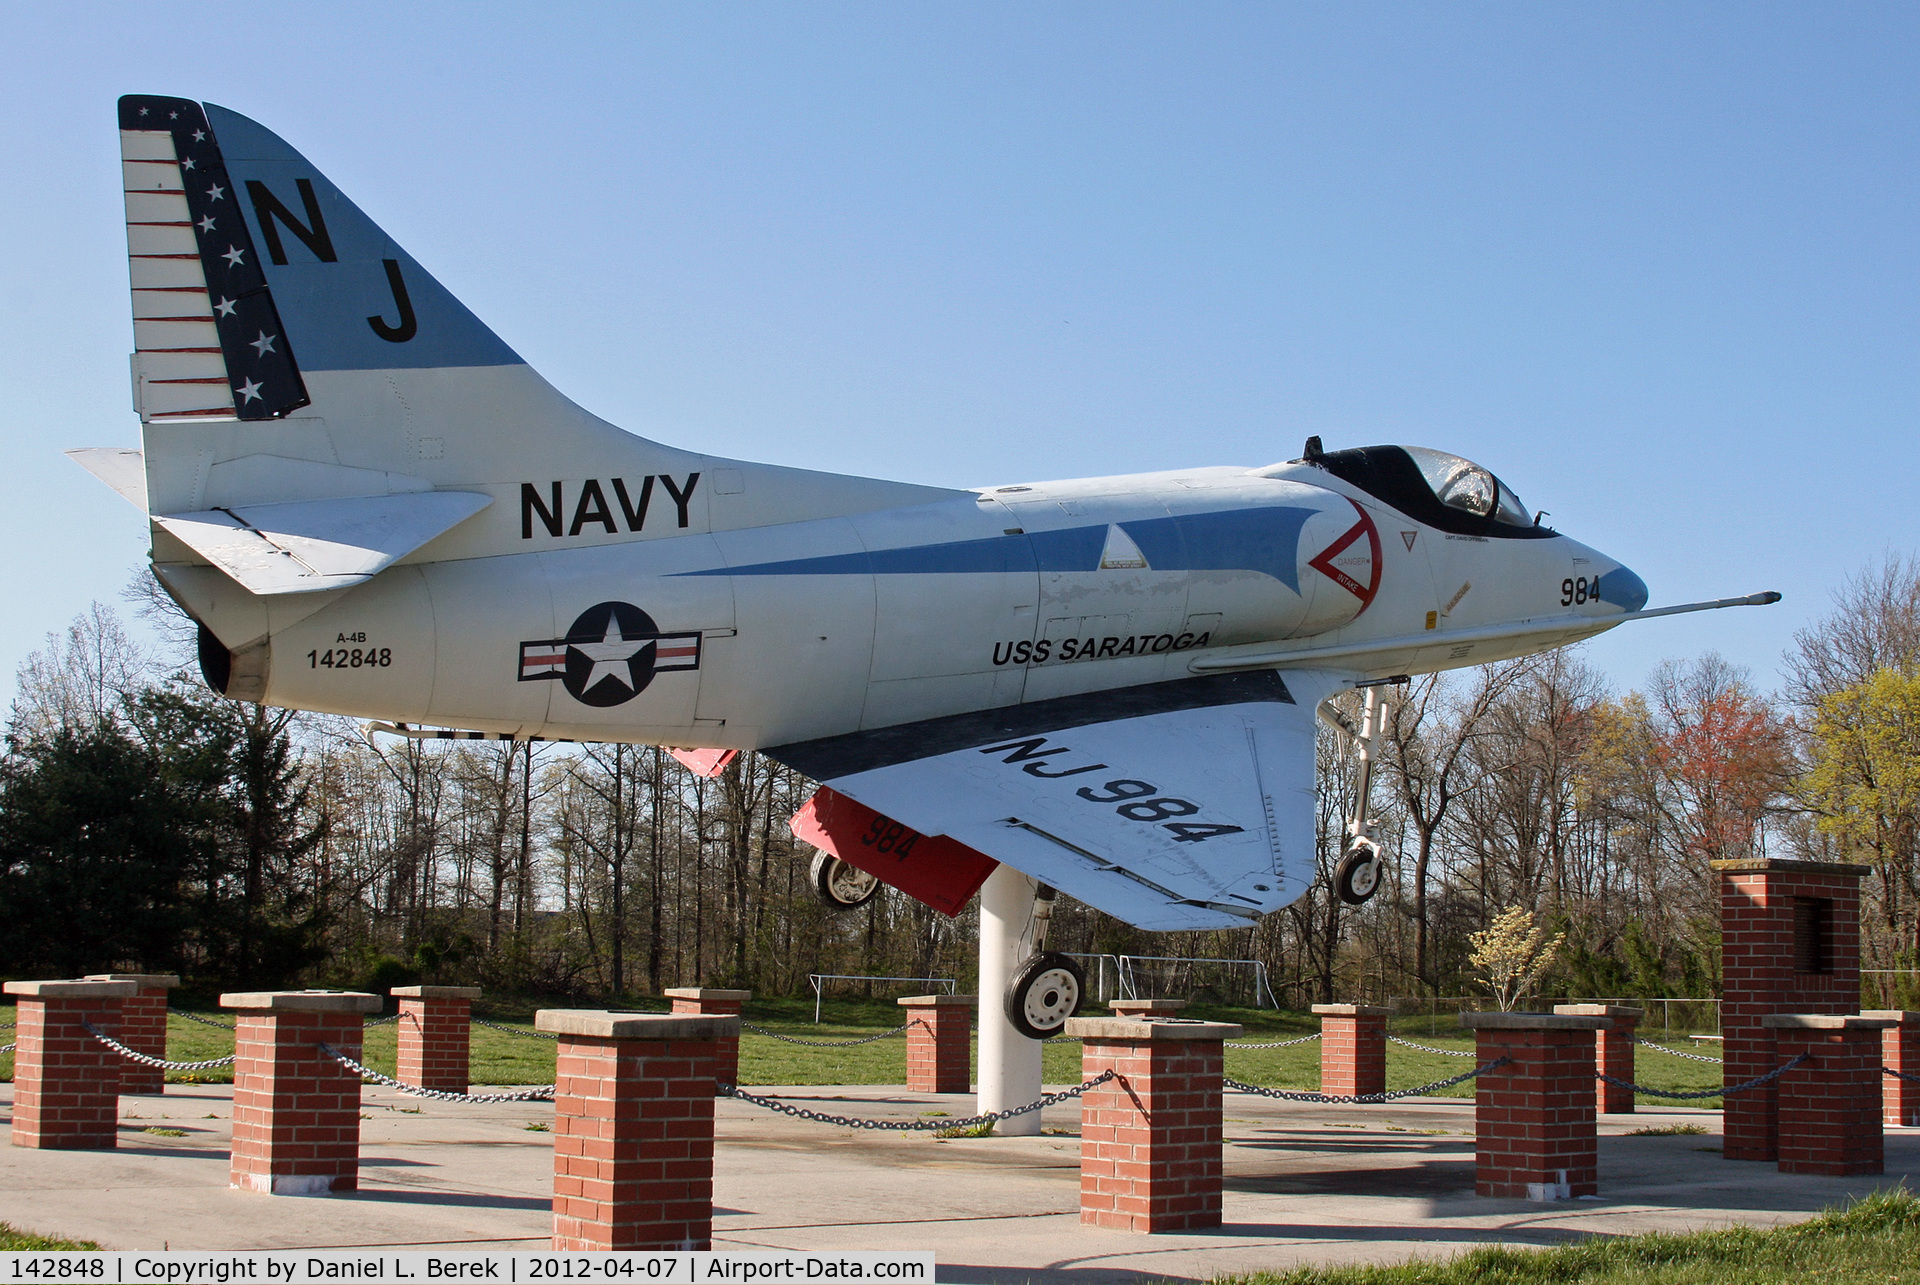 142848, Douglas A-4B Skyhawk C/N 11910, This beautiful Skyhawk was donated to the township of Ewing in 1998 as the centerpiece of the General Betor Veterans Memorial Park, located just behind the municipal building.